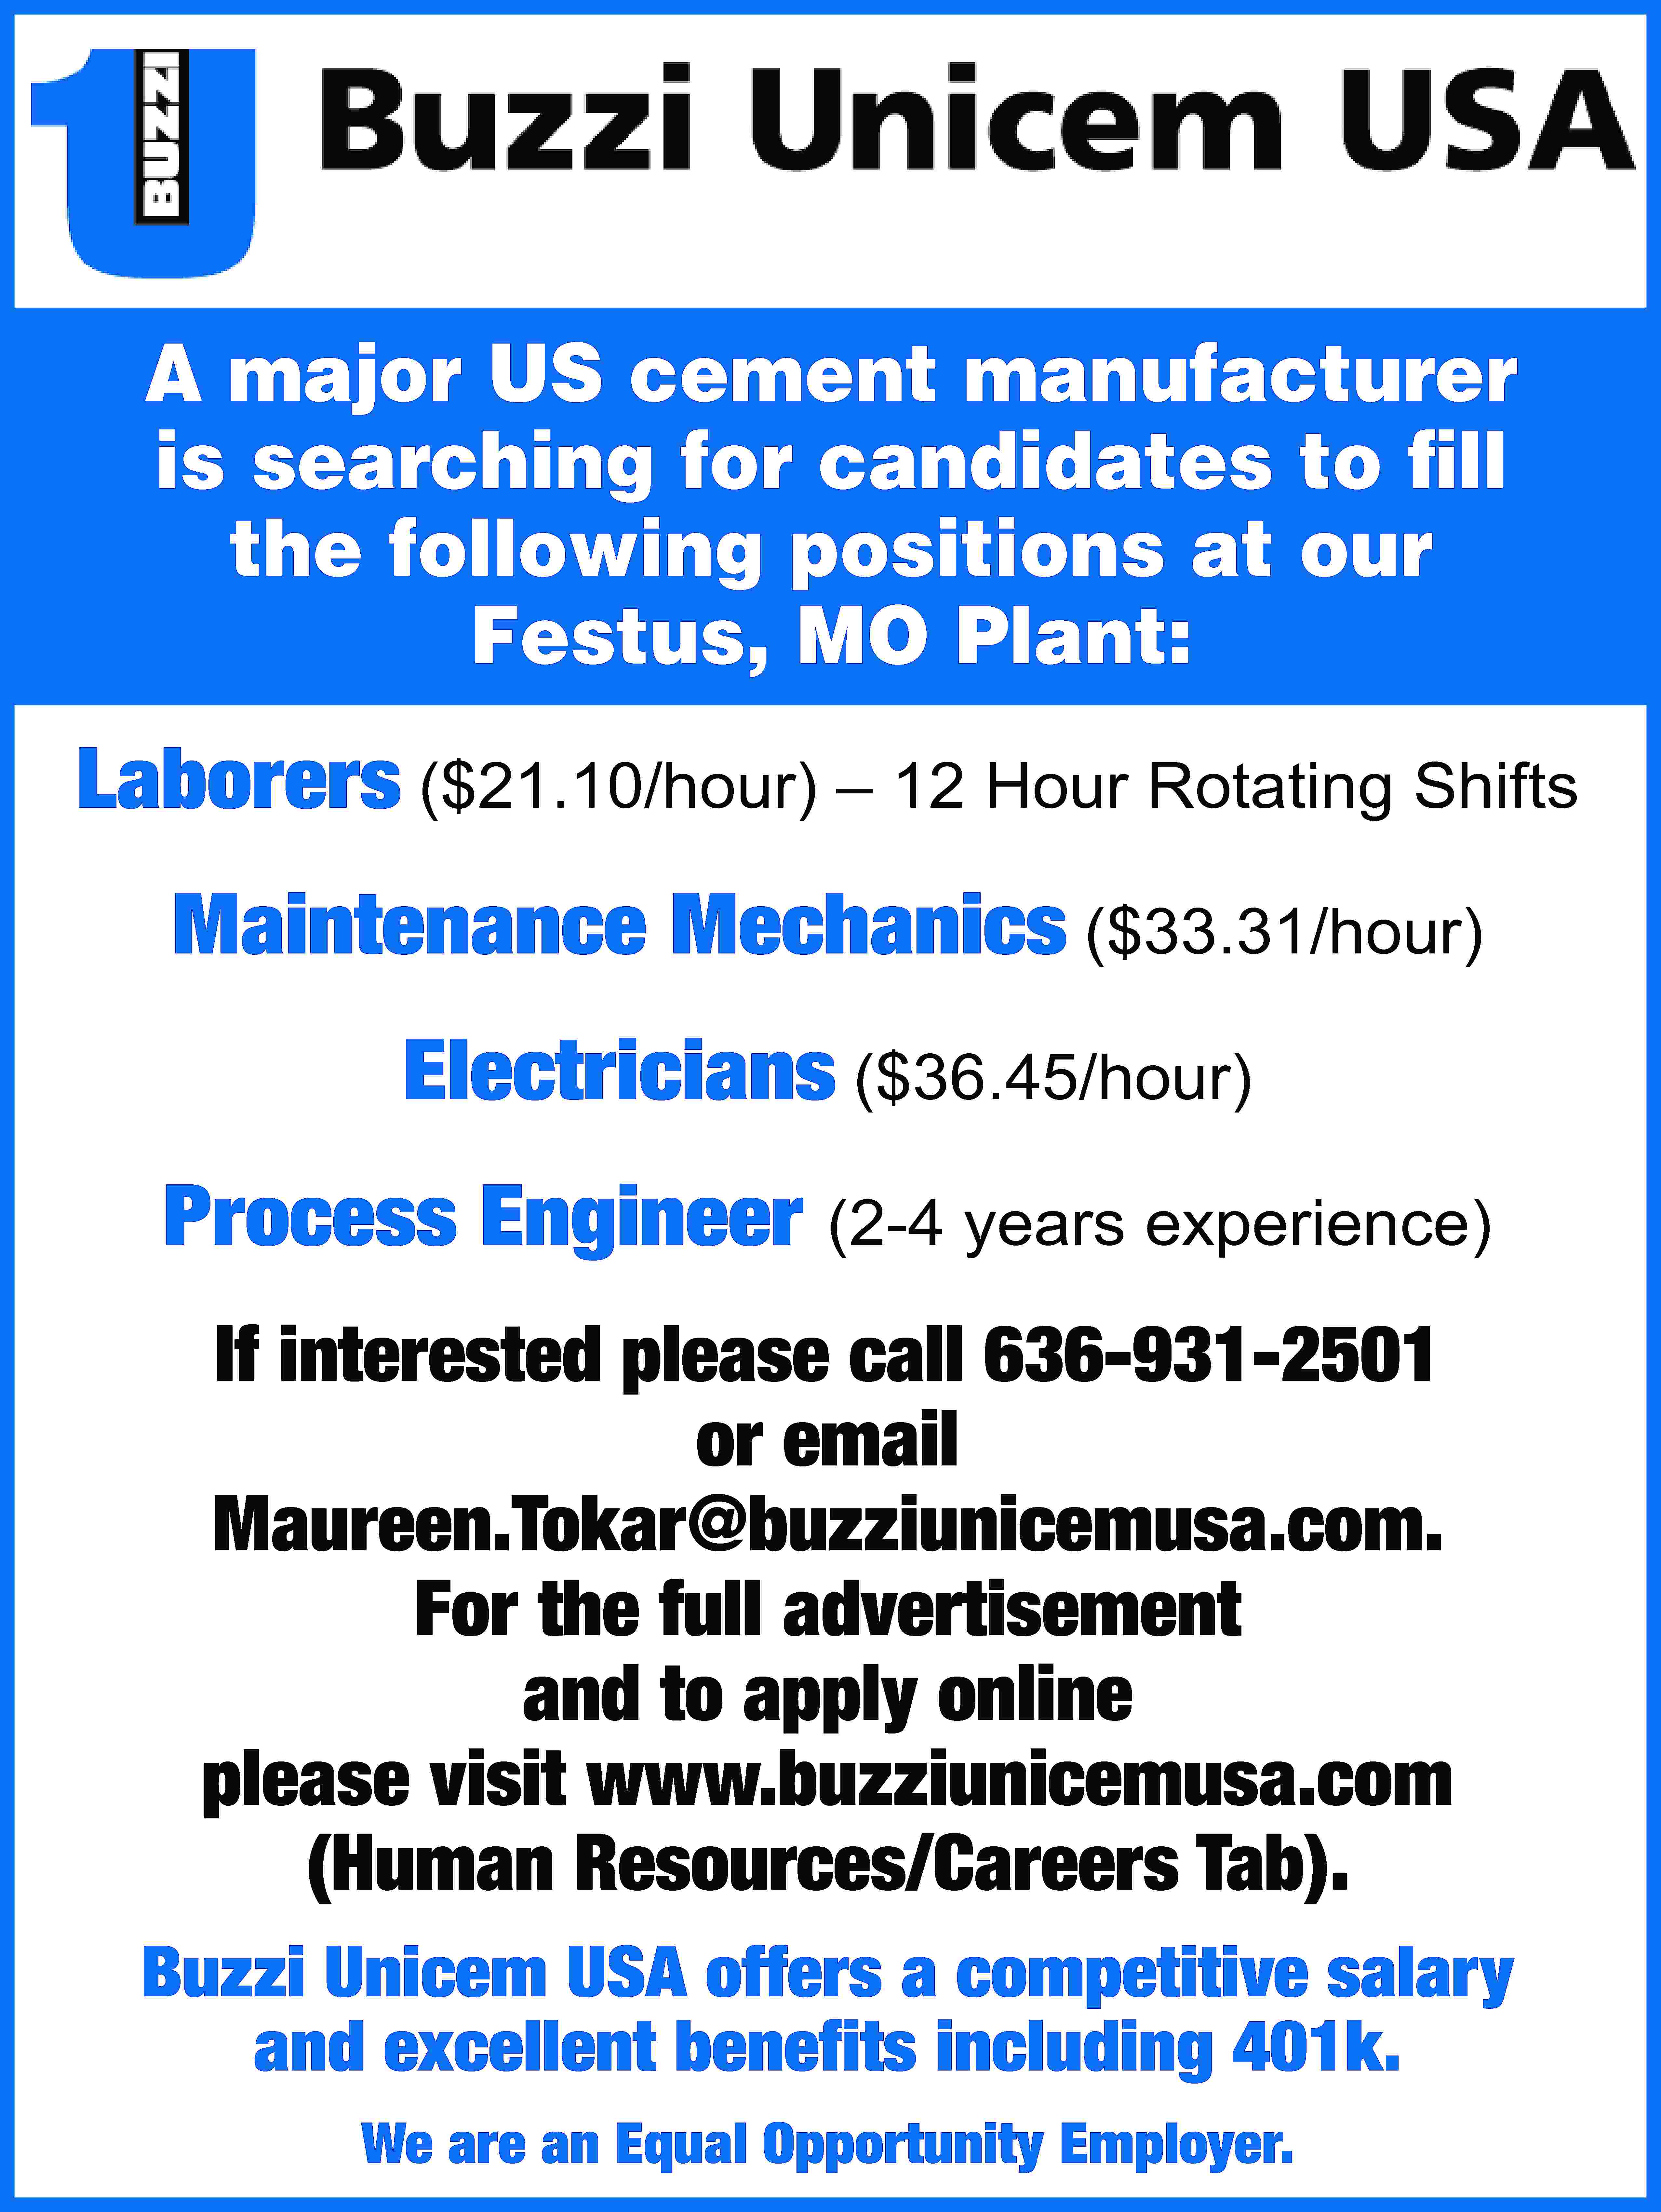 A major US cement manufacturer  A major US cement manufacturer is searching for candidates to fill the following positions at our Festus, MO Plant: Laborers ($21.10/hour) – 12 Hour Rotating Shifts Maintenance Mechanics ($33.31/hour) Electricians ($36.45/hour) Process Engineer (2-4 years experience) If interested please call 636-931-2501 or email Maureen.Tokar@buzziunicemusa.com. For the full advertisement and to apply online please visit www.buzziunicemusa.com (Human Resources/Careers Tab). Buzzi Unicem USA offers a competitive salary and excellent benefits including 401k. We are an Equal Opportunity Employer.